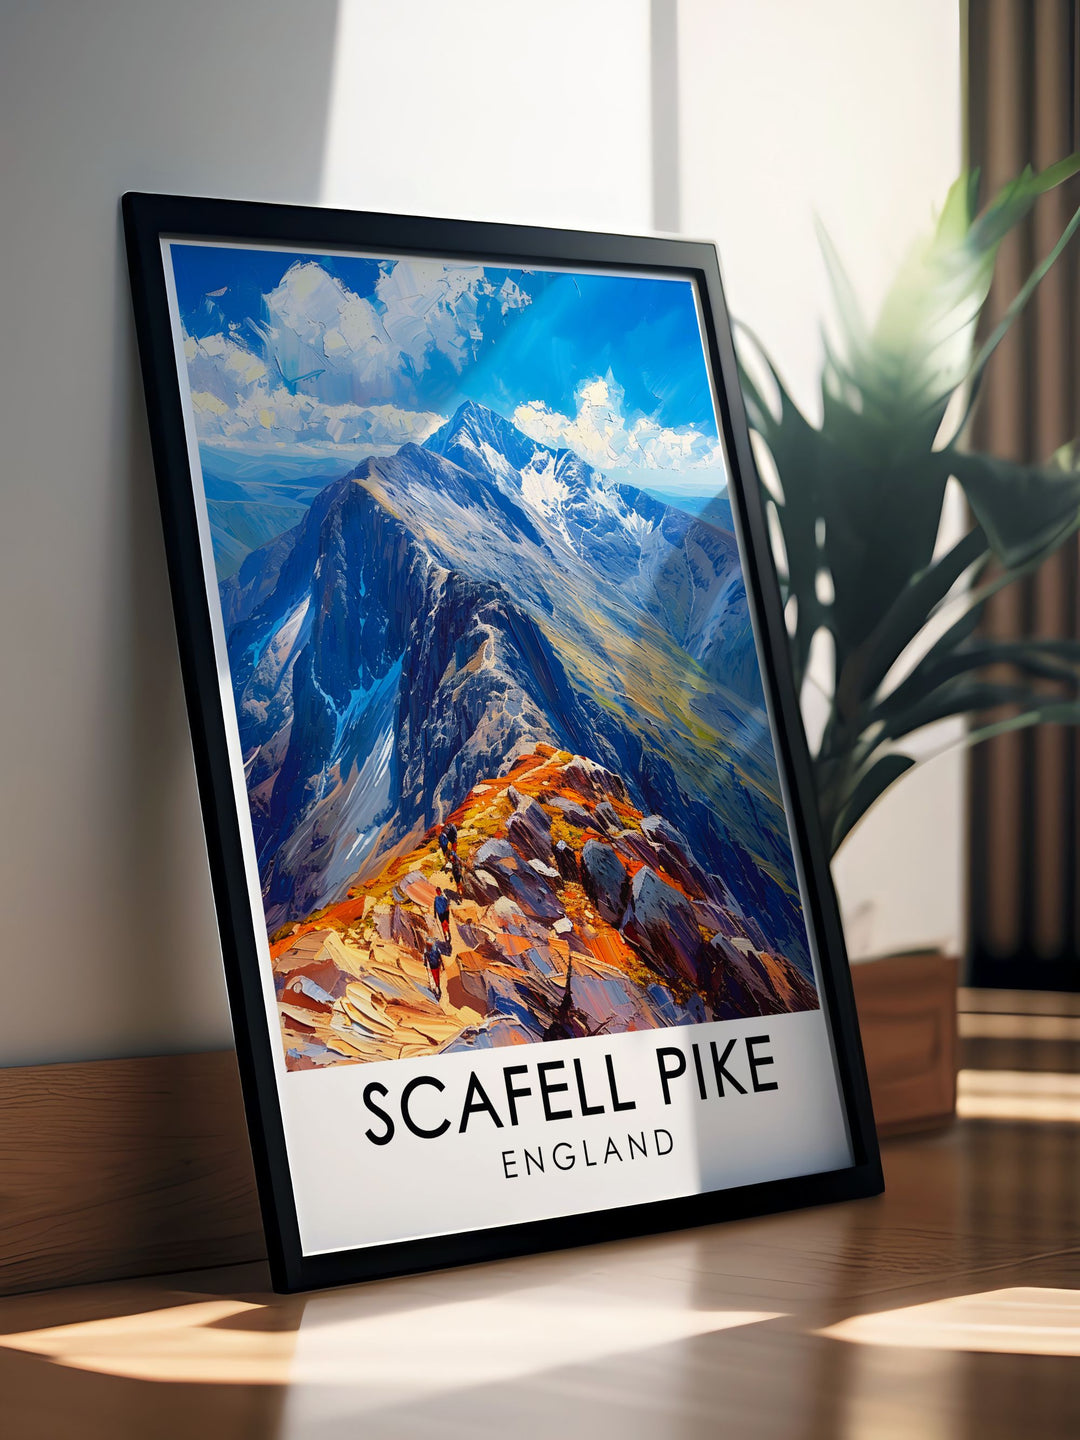 High quality poster of Scafell Pike, showcasing the peaks impressive height and scenic surroundings. Ideal for framing and displaying as part of a nature inspired home decor collection.